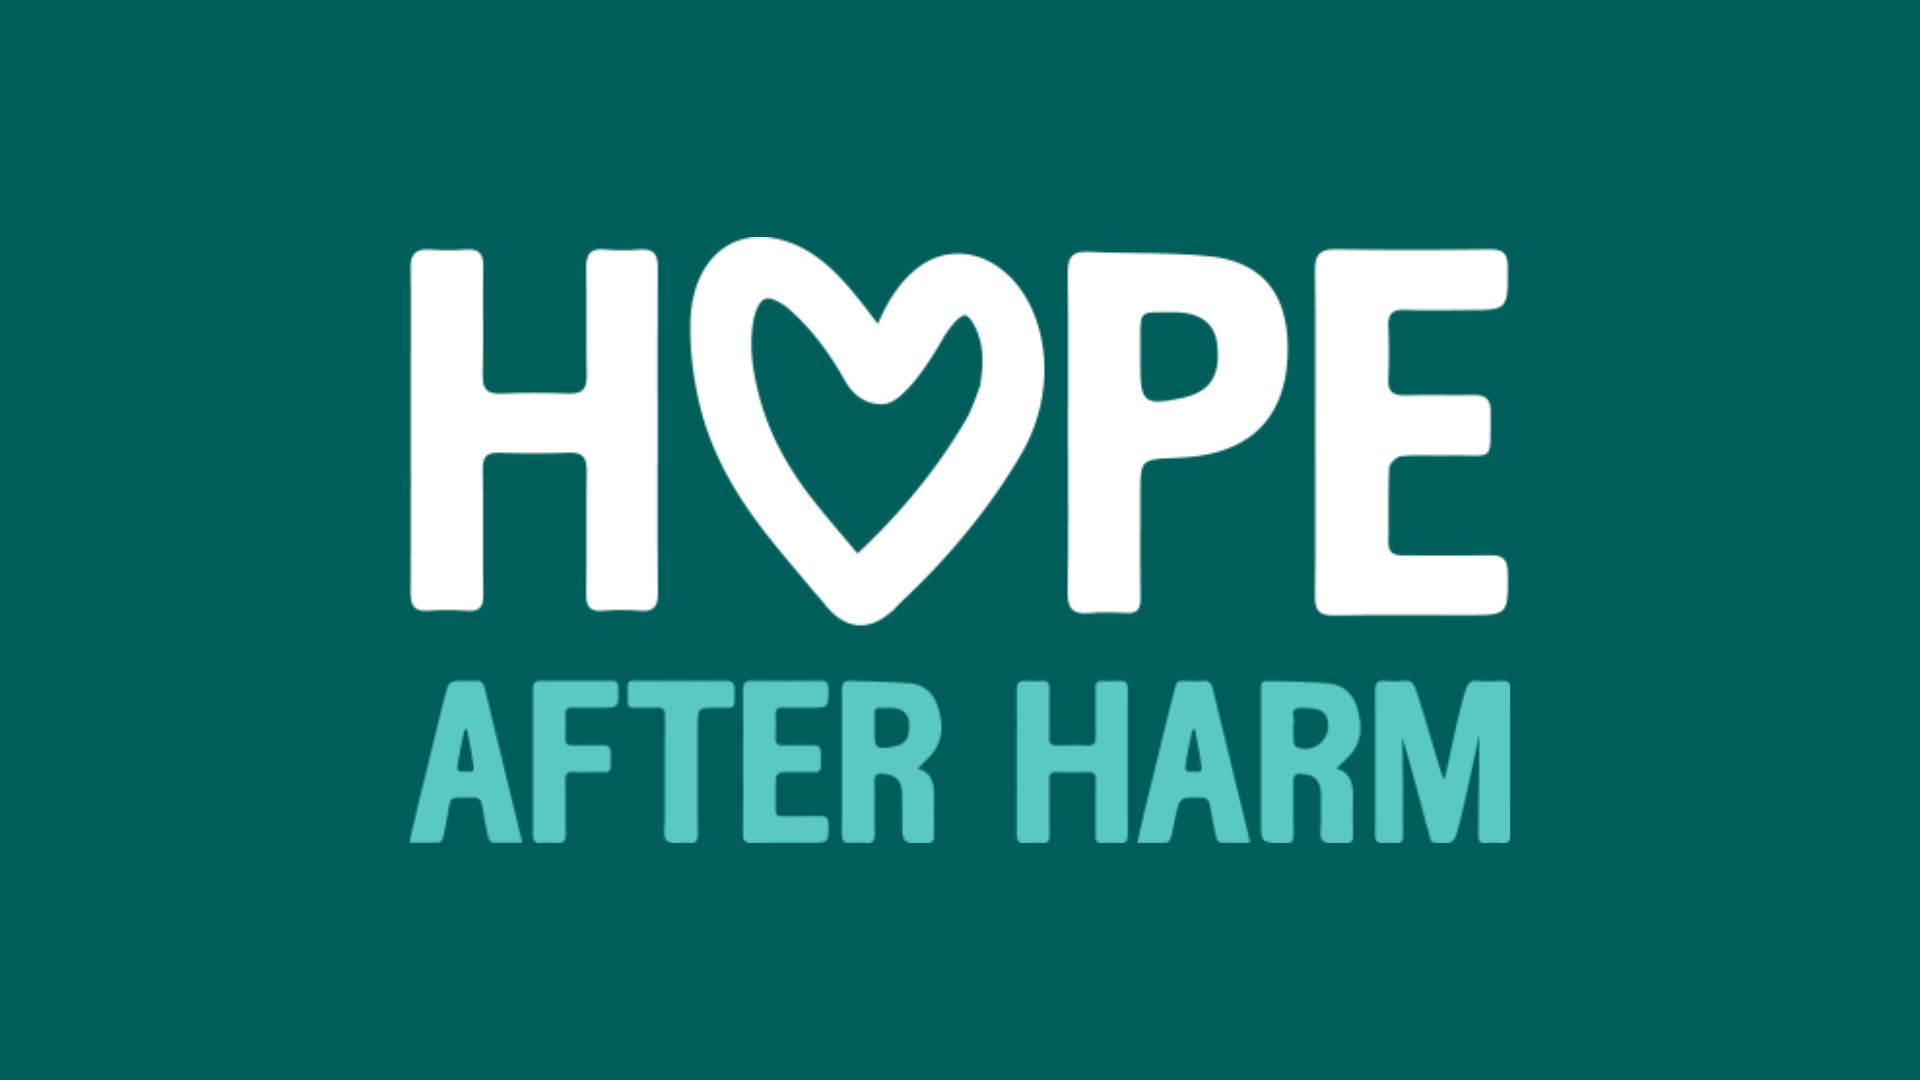 Thames Valley Partnership announces it has rebranded to Hope After Harm